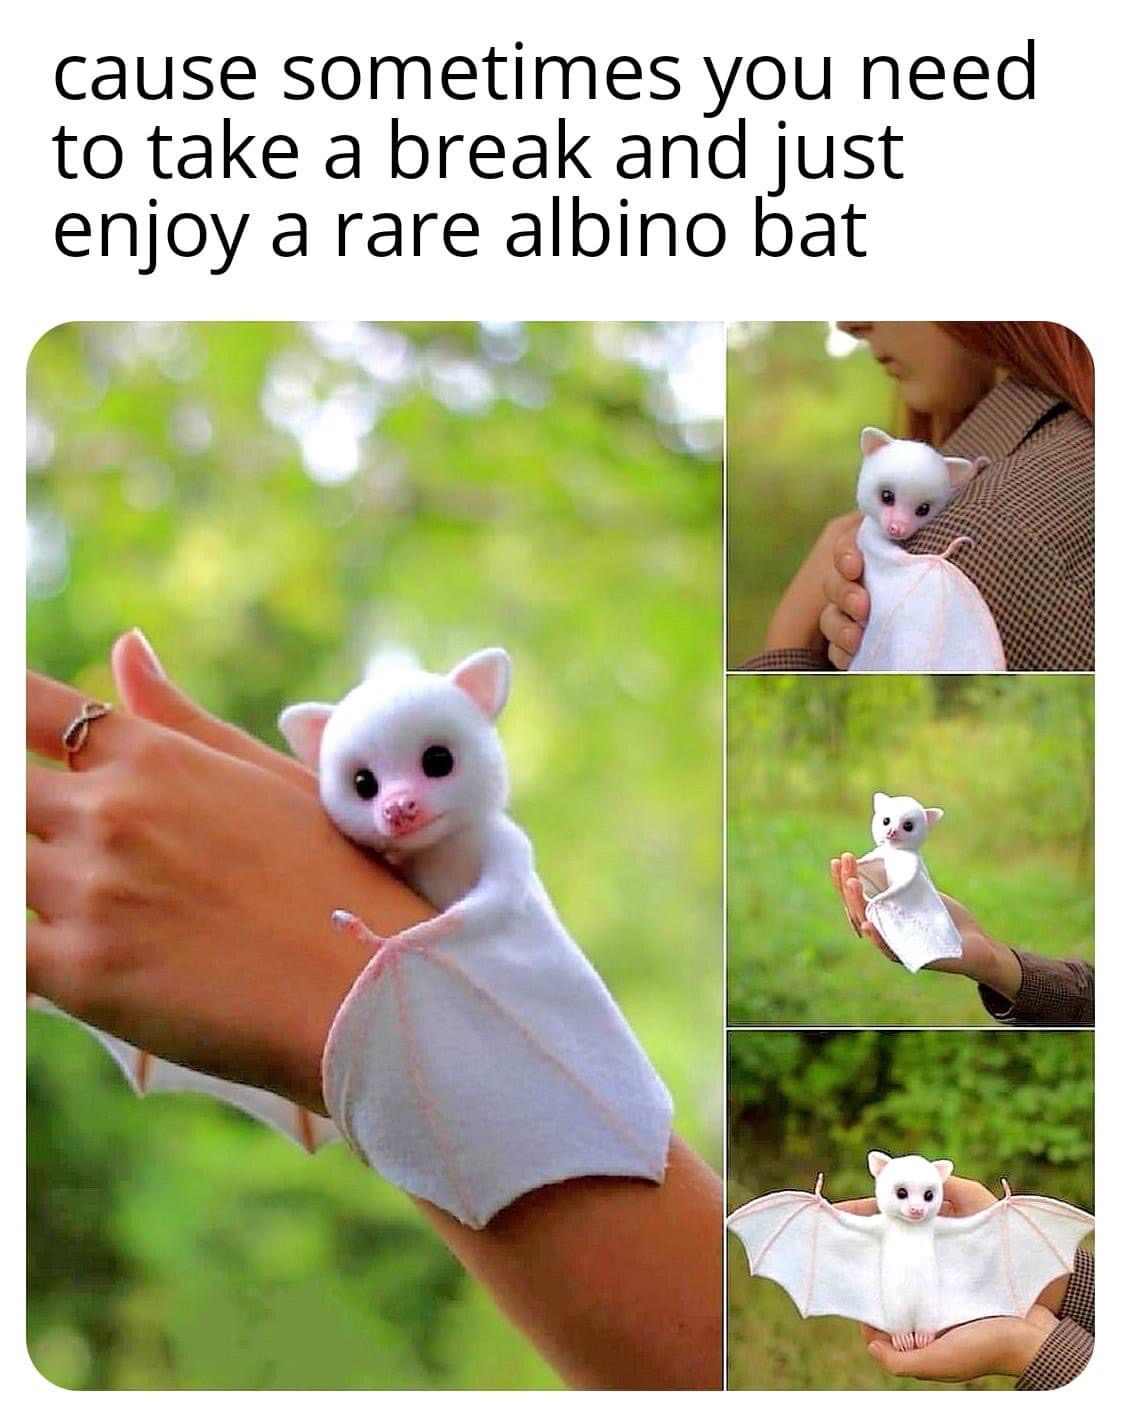 covid bat memes - cause sometimes you need to take a break and just enjoy a rare albino bat